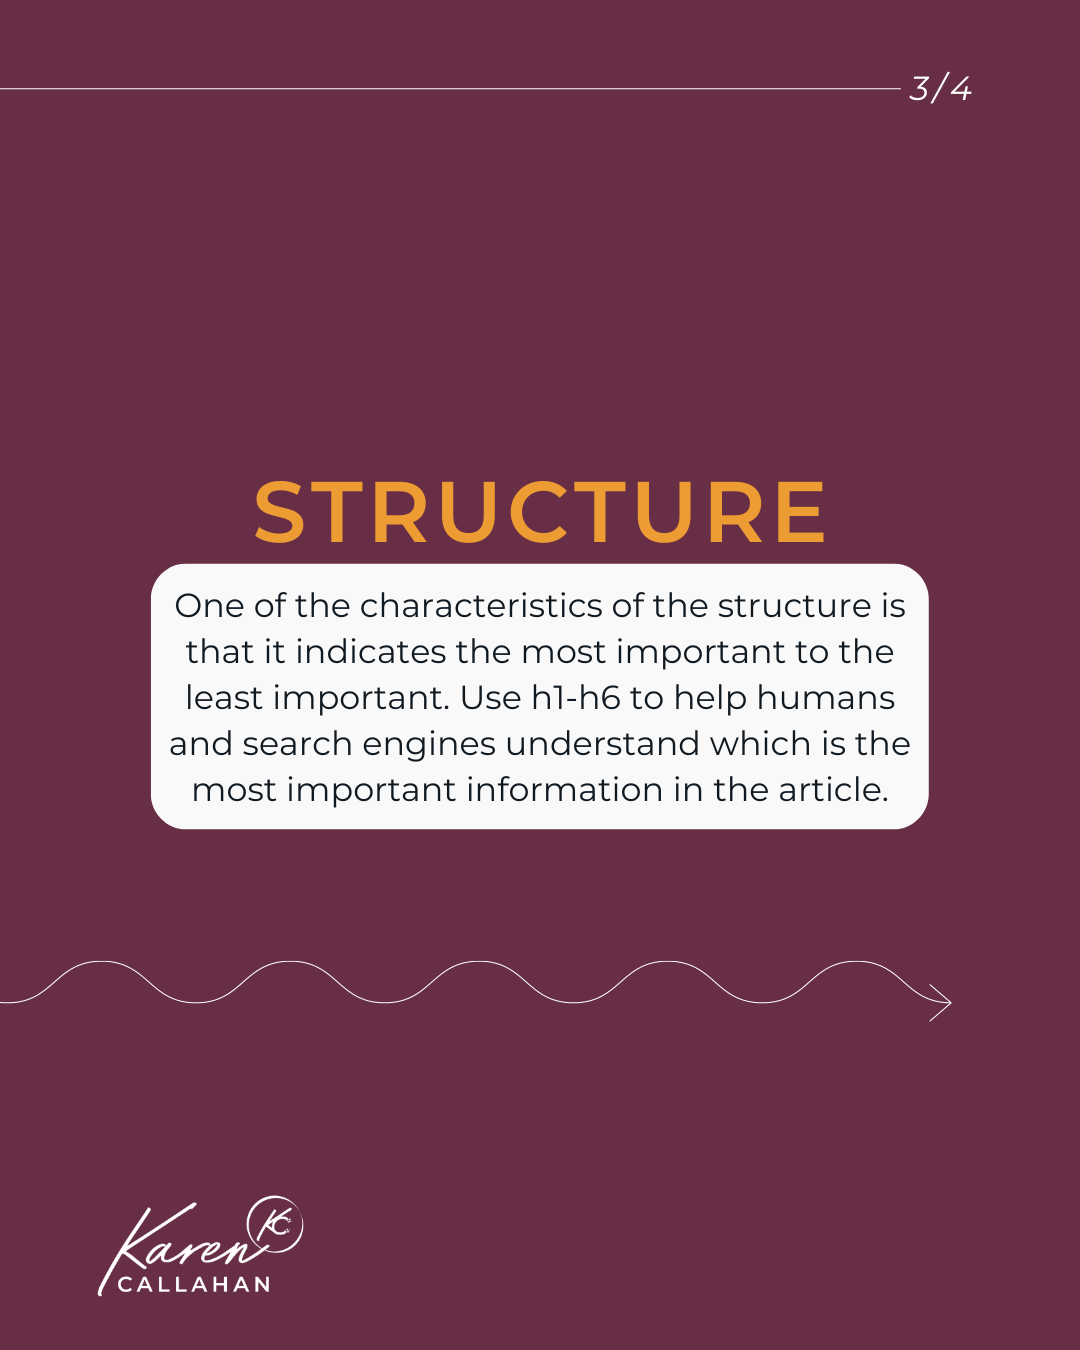 Blog post structure impacts SEO